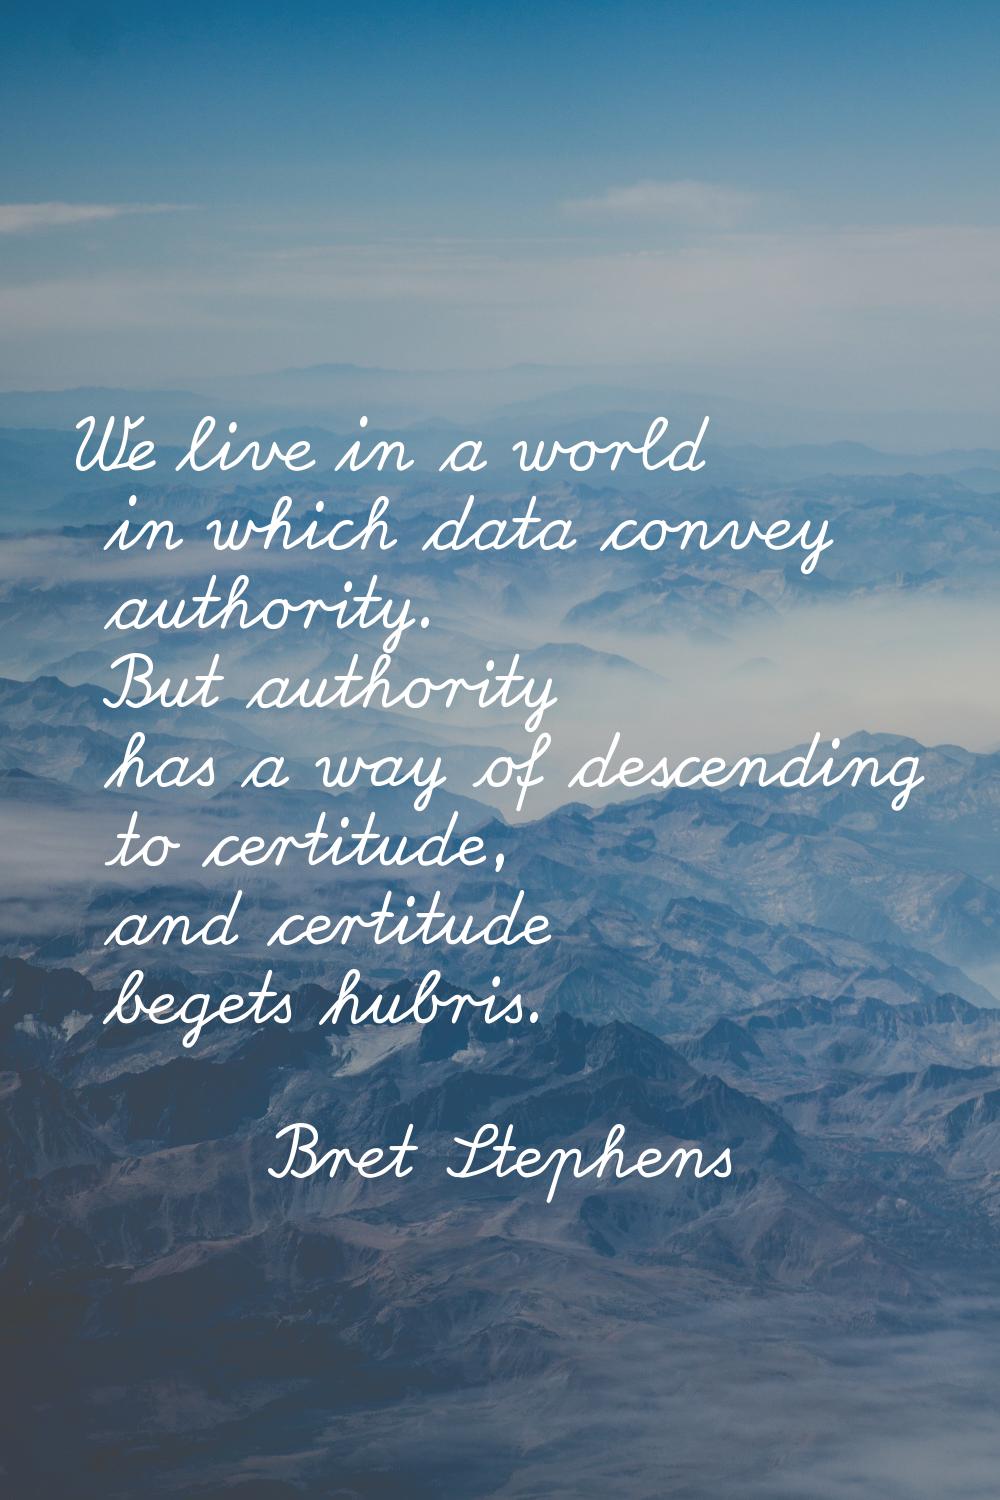 We live in a world in which data convey authority. But authority has a way of descending to certitu